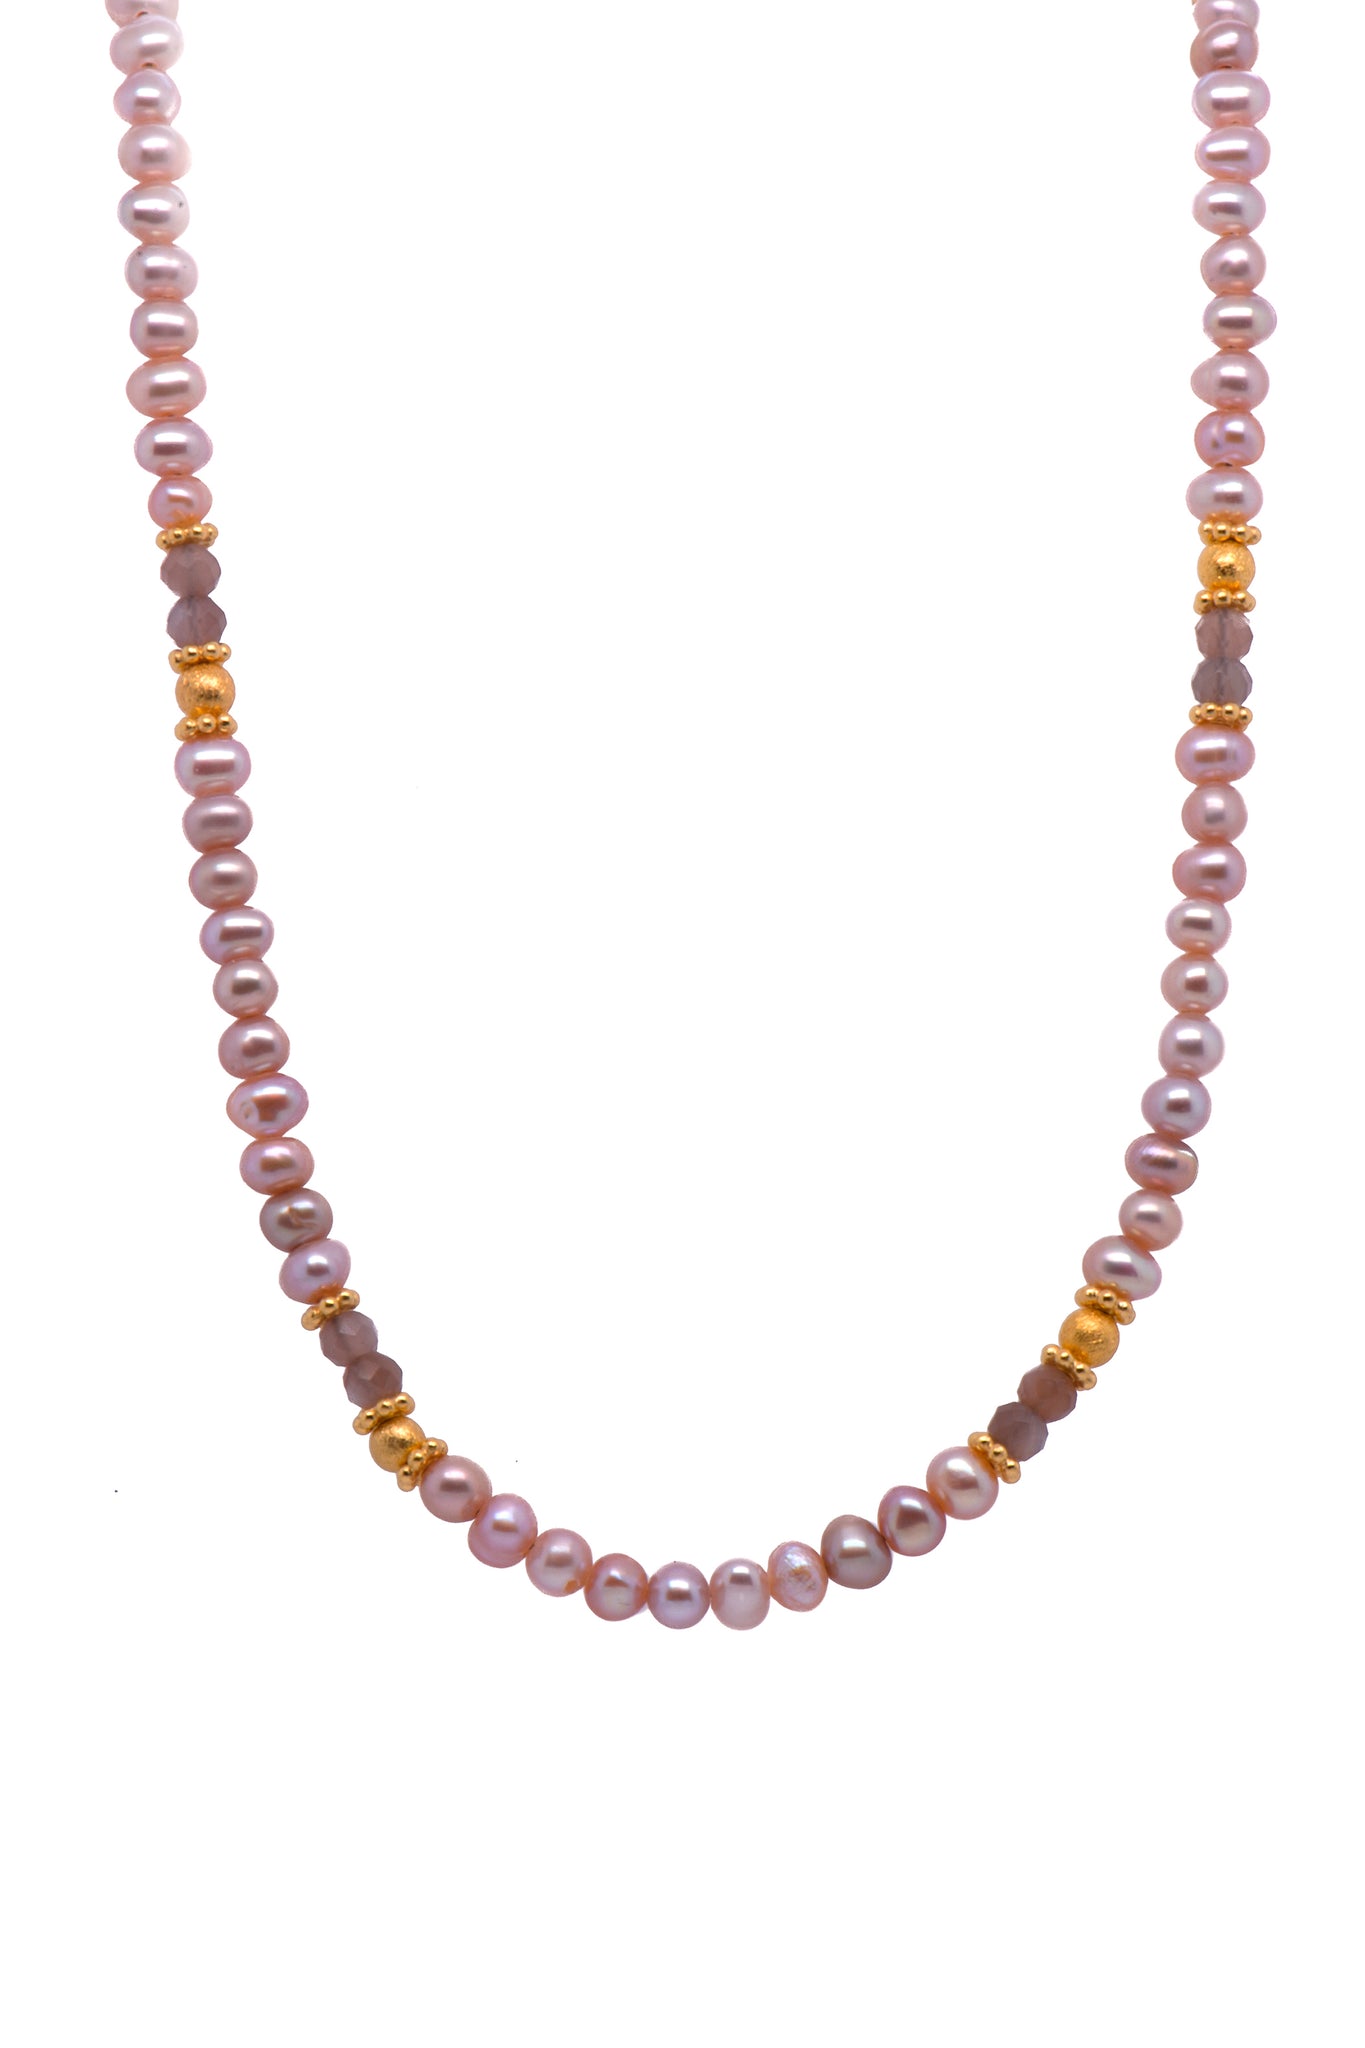 Pearl and Moonstone Necklace Fair Trade 24K Gold Vermeil